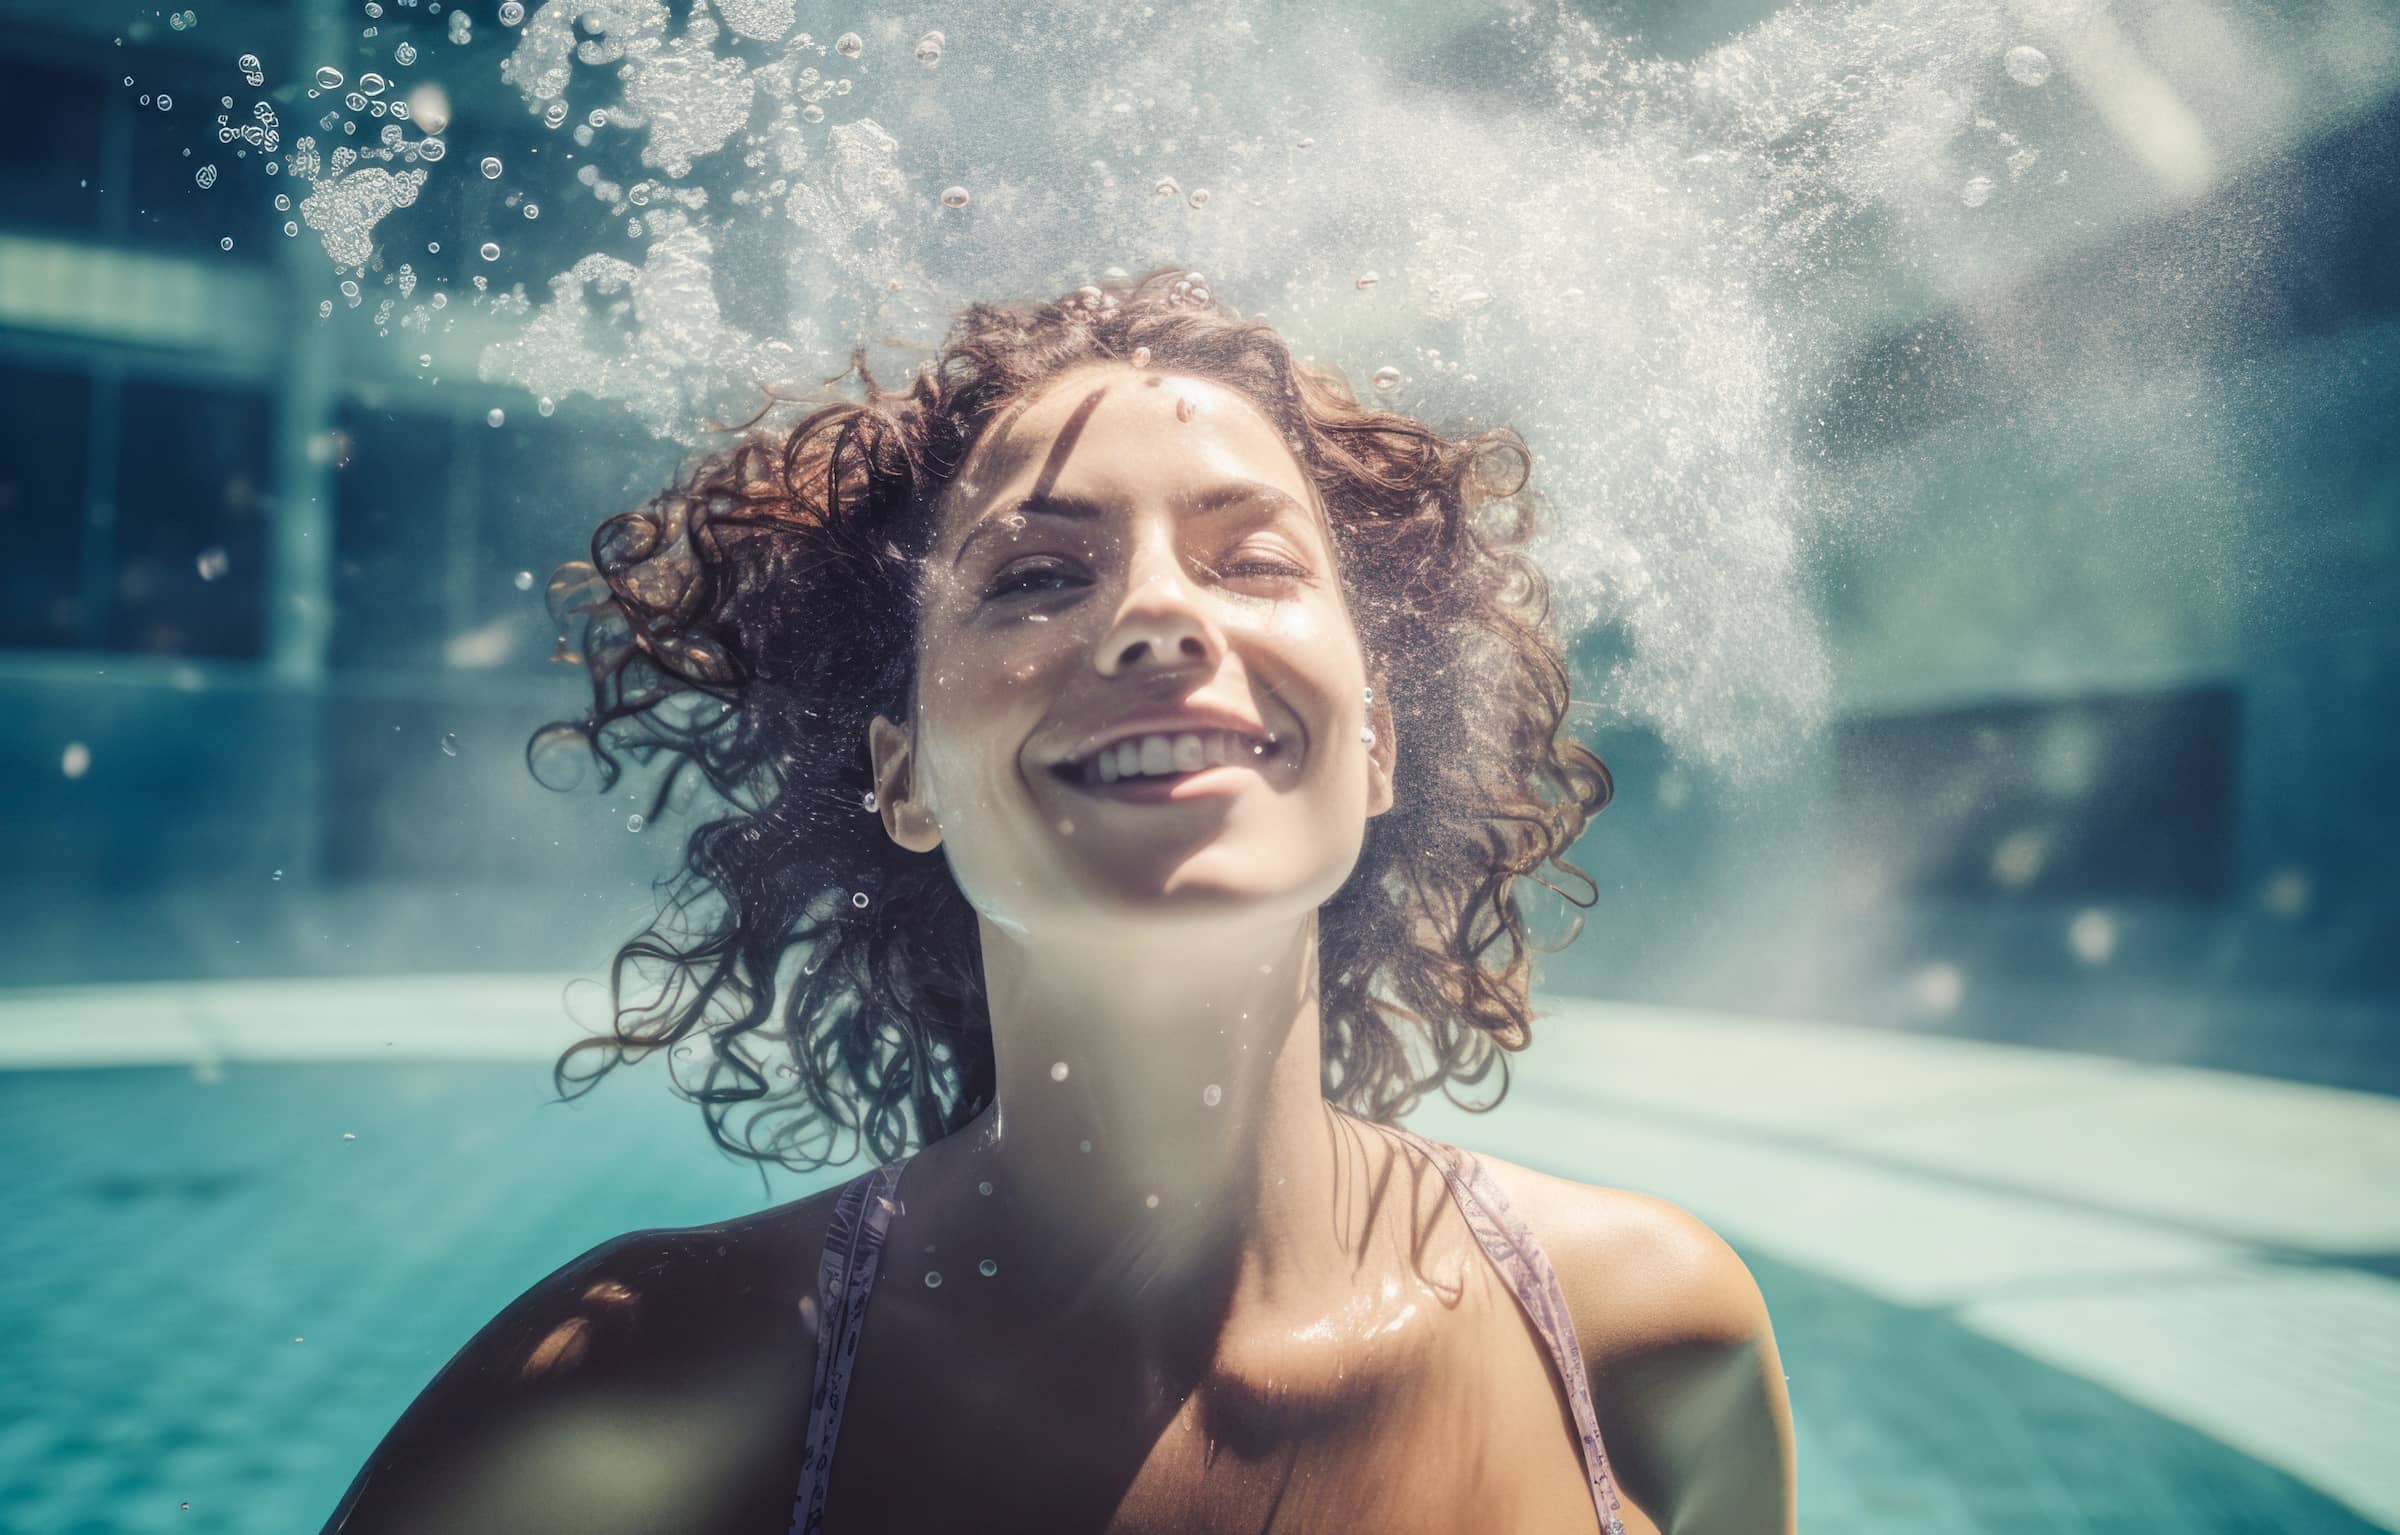 A woman finds relaxation by swimming in a pool.